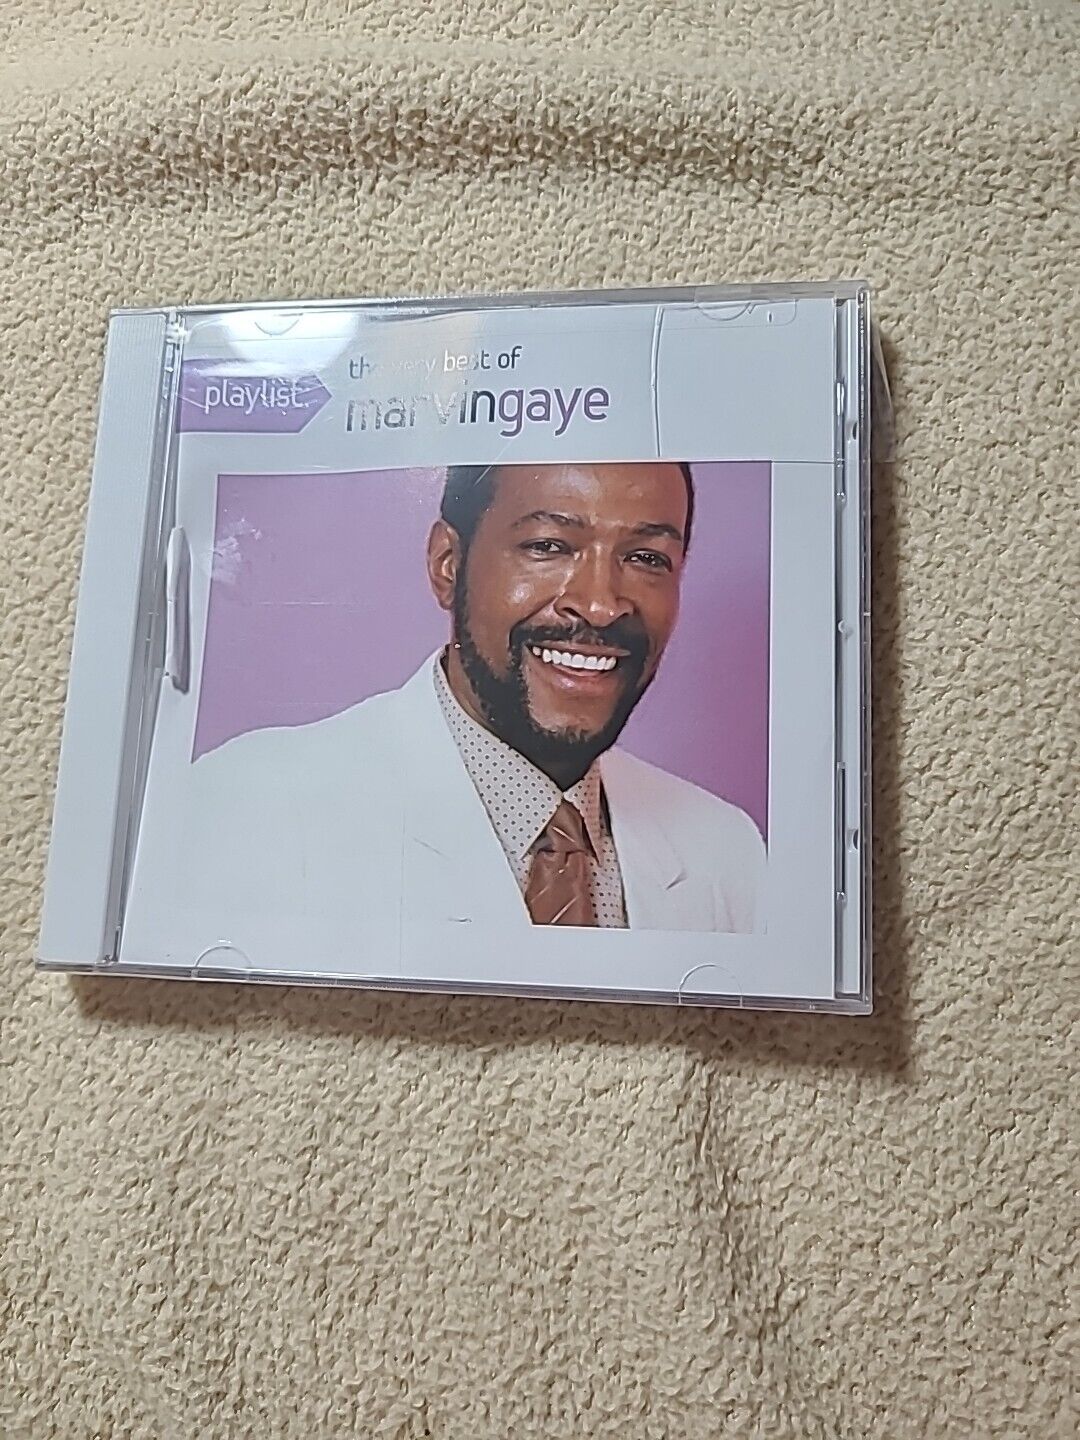 Playlist: The Very Best of Marvin Gaye by Marvin Gaye (CD, 2011)